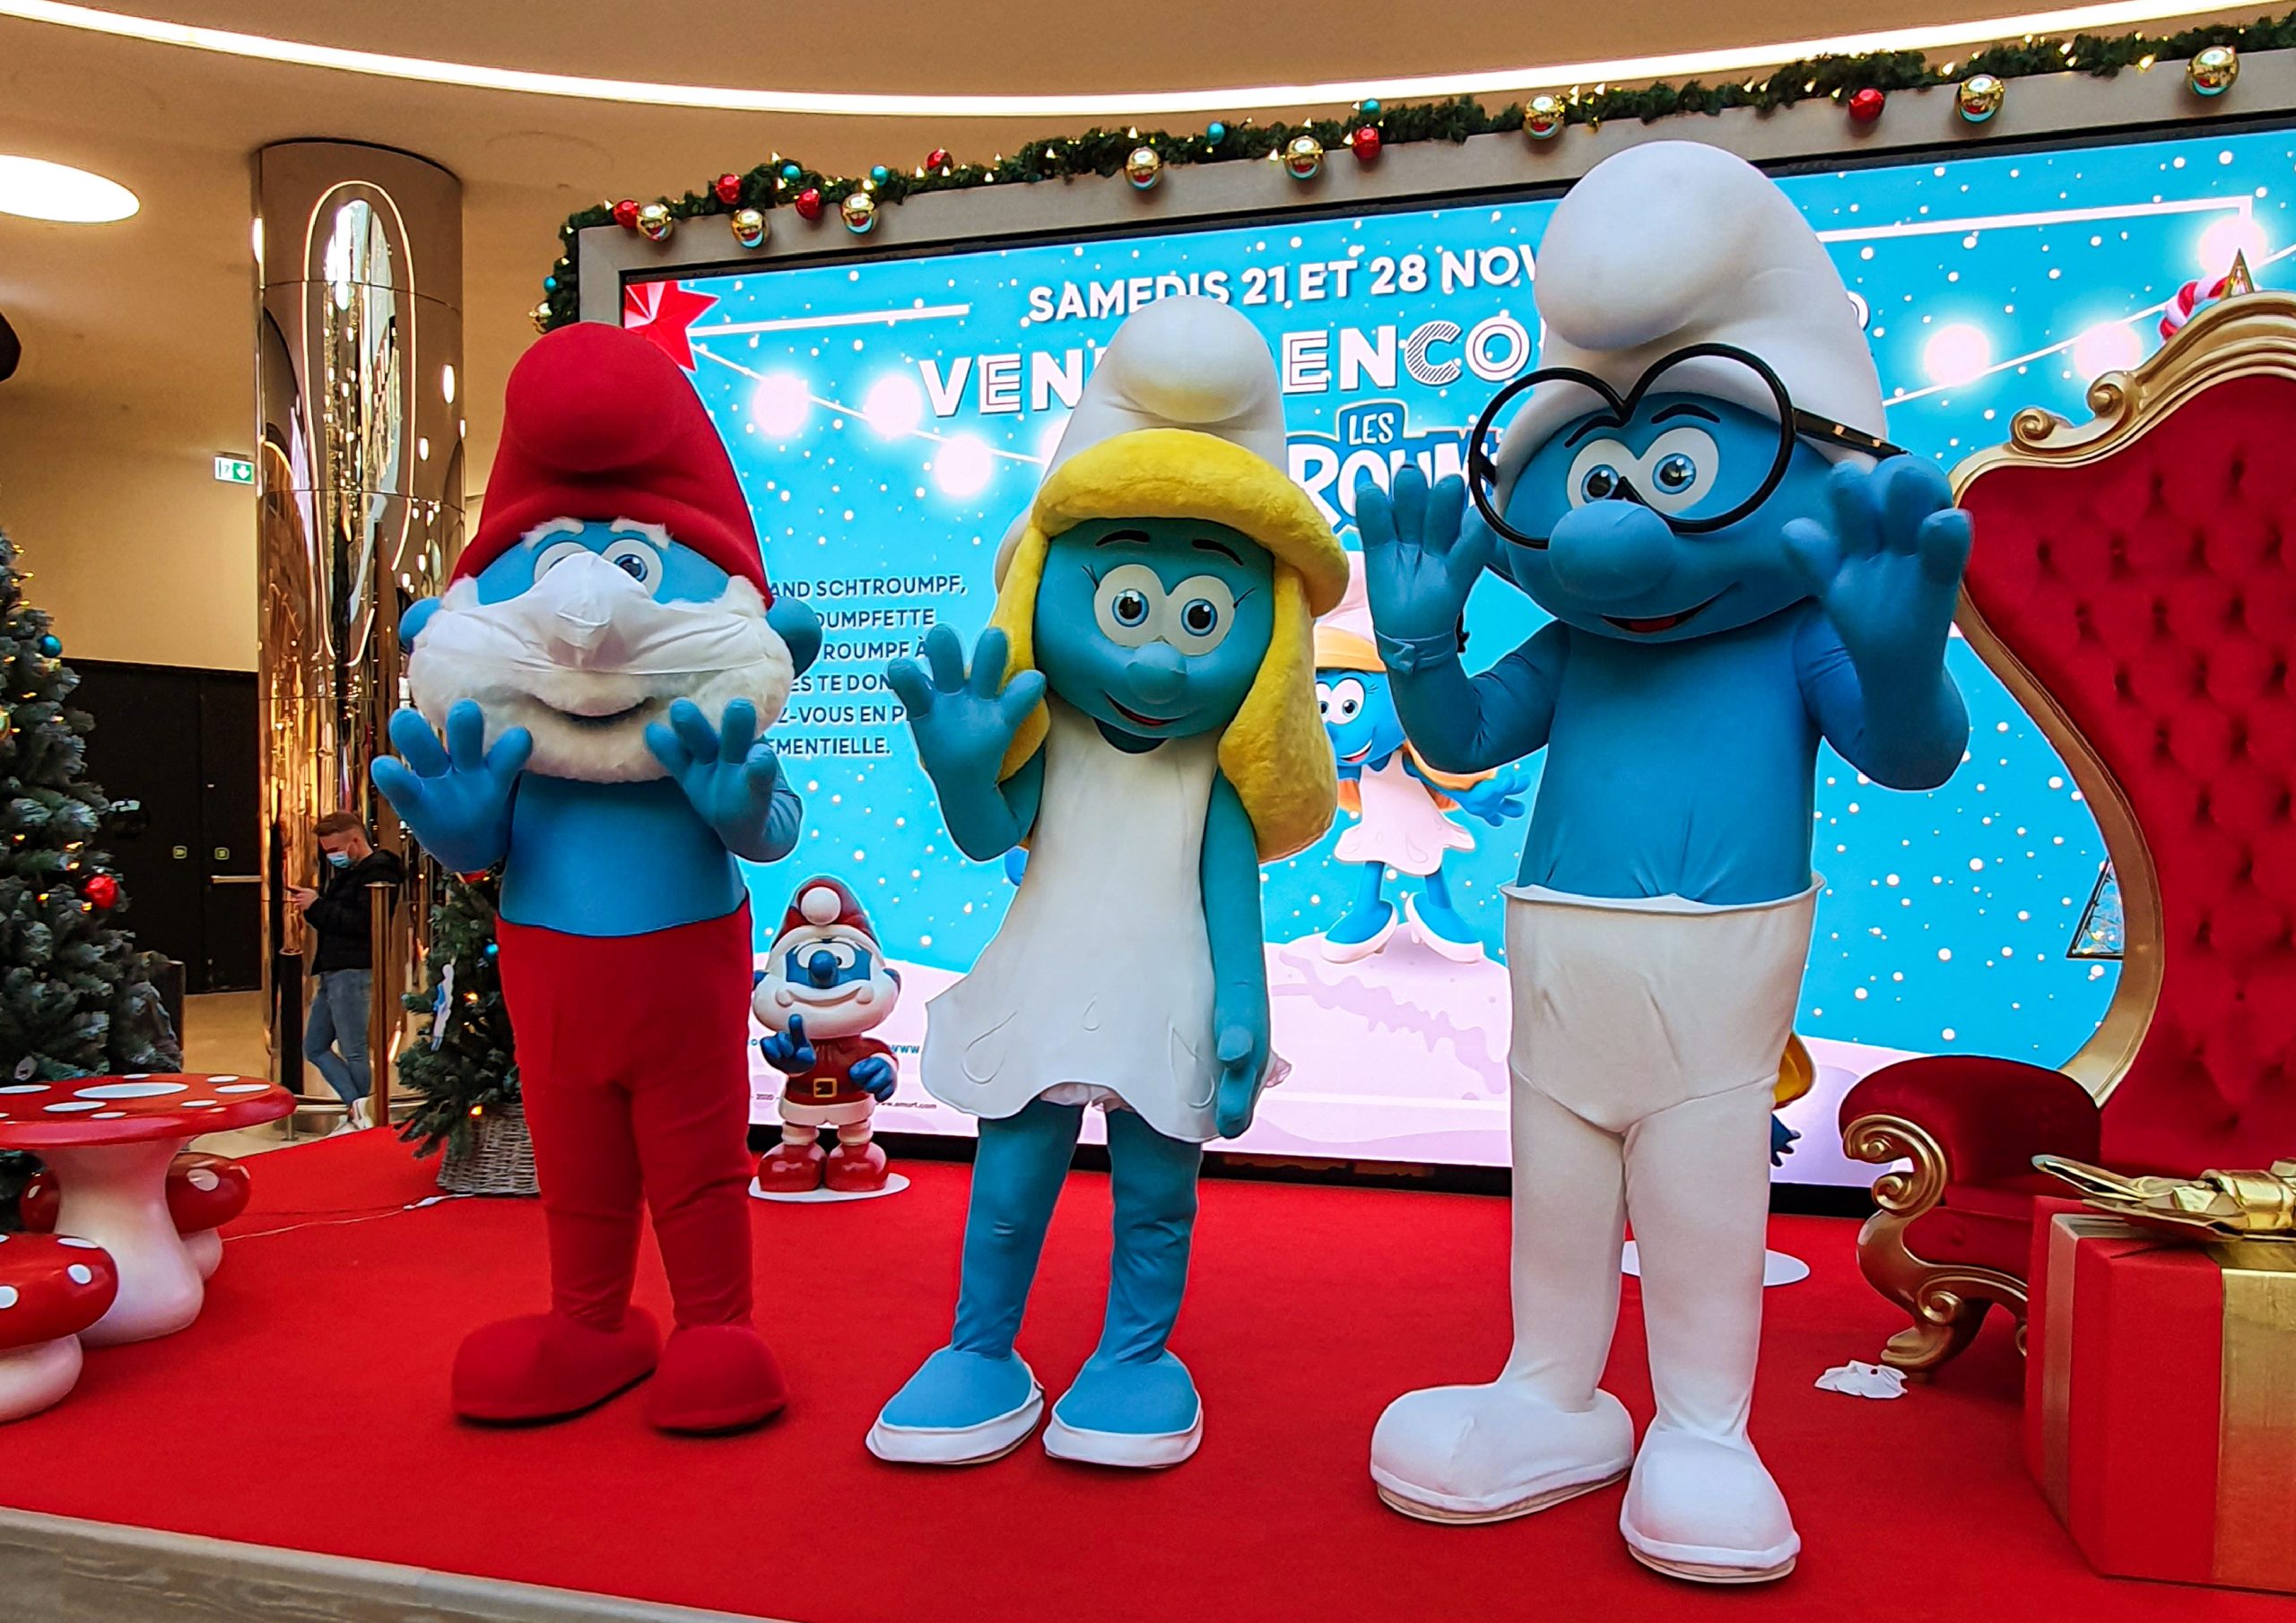 CHRISTMAS WITH THE SMURFS – IMPS